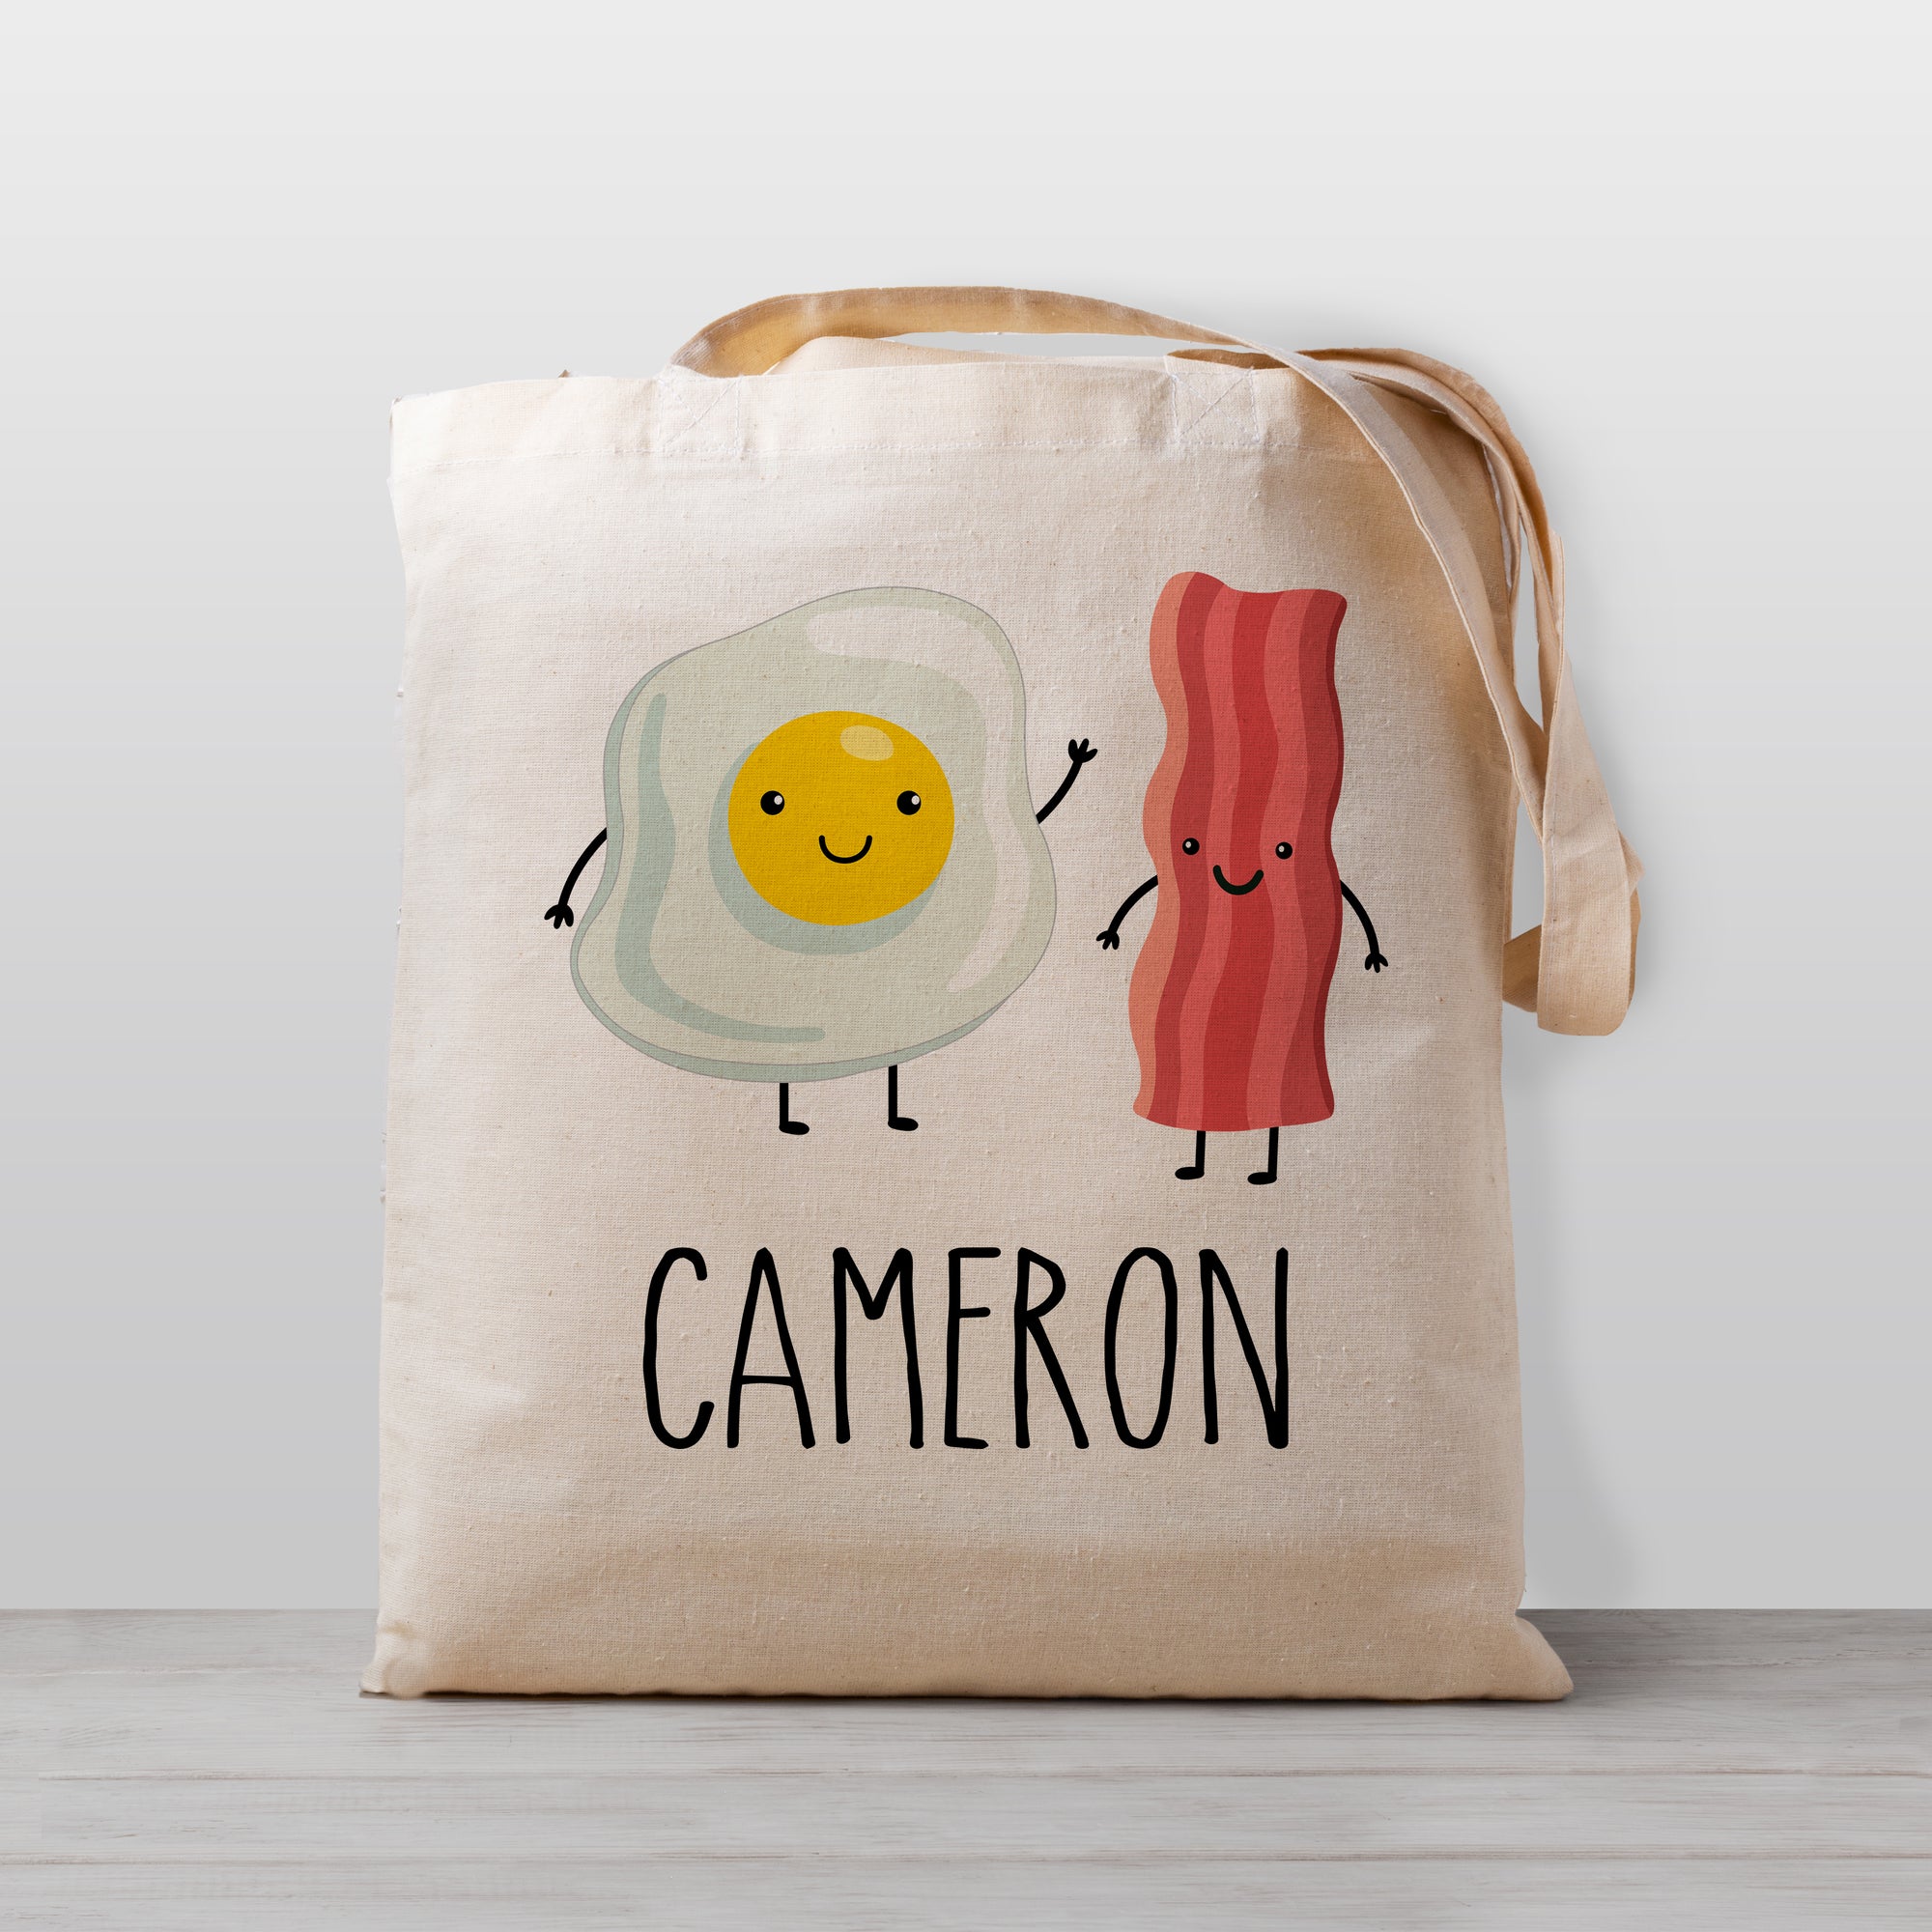 Cute Bacon and Eggs Breakfast tote bag, personalized with your child's name. 100% cotton canvas, great for daycare, preschool, kindergarten, or to use for library books